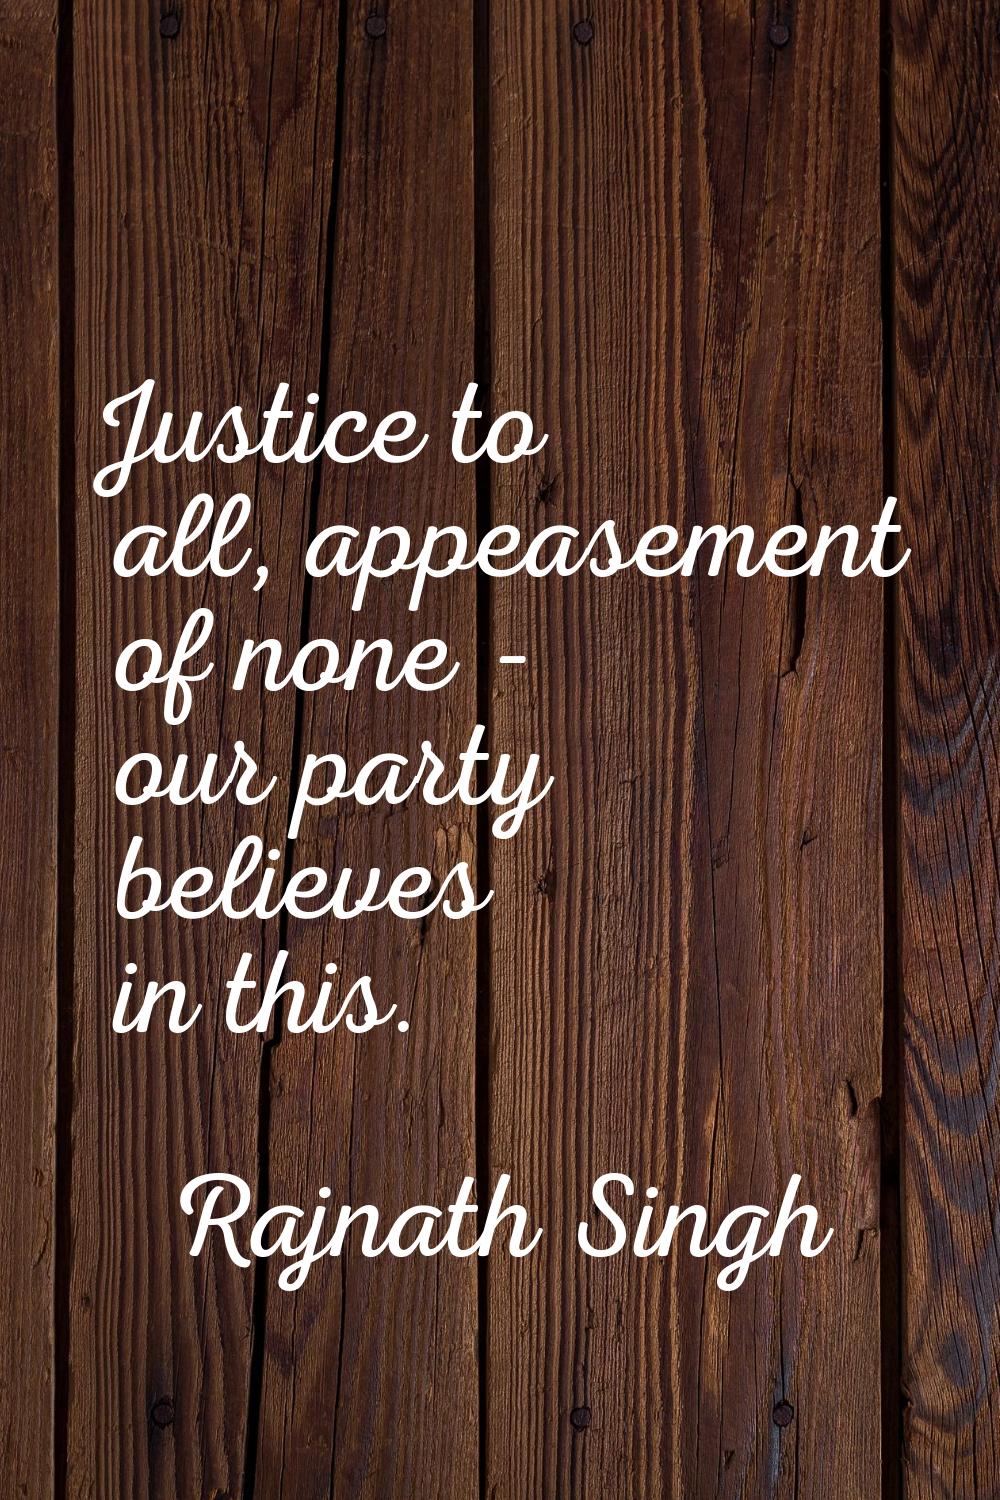 Justice to all, appeasement of none - our party believes in this.